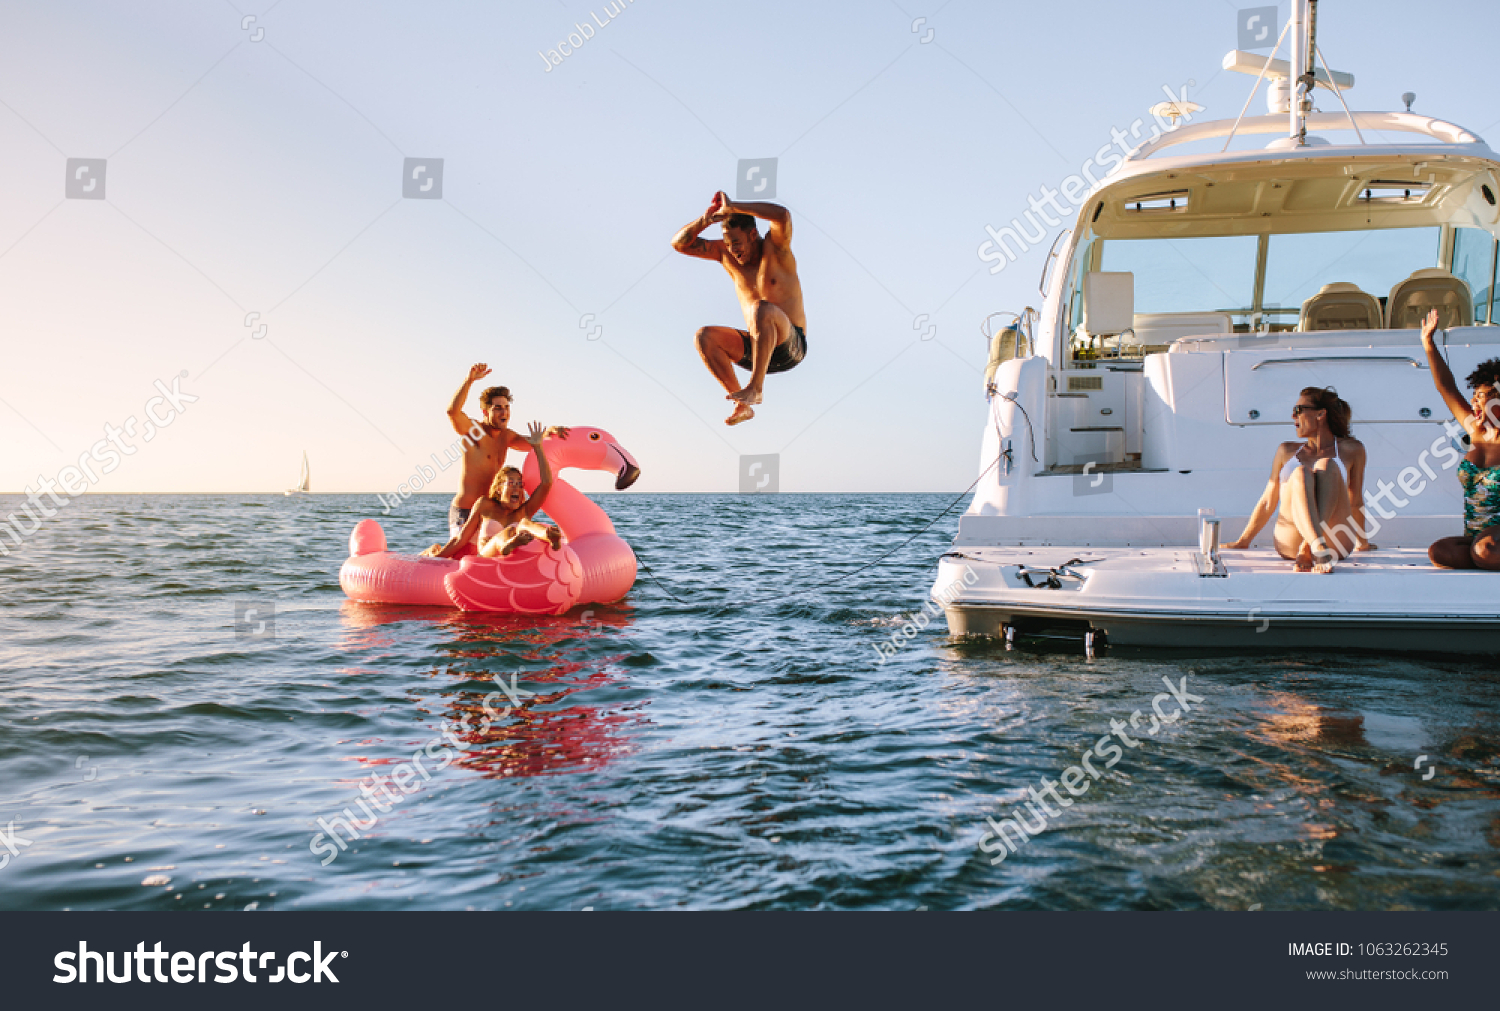 Man diving in the sea with friends sitting on yacht and inflatable toy. Group of friends enjoying a summer day on a inflatable toy and yacht. #1063262345